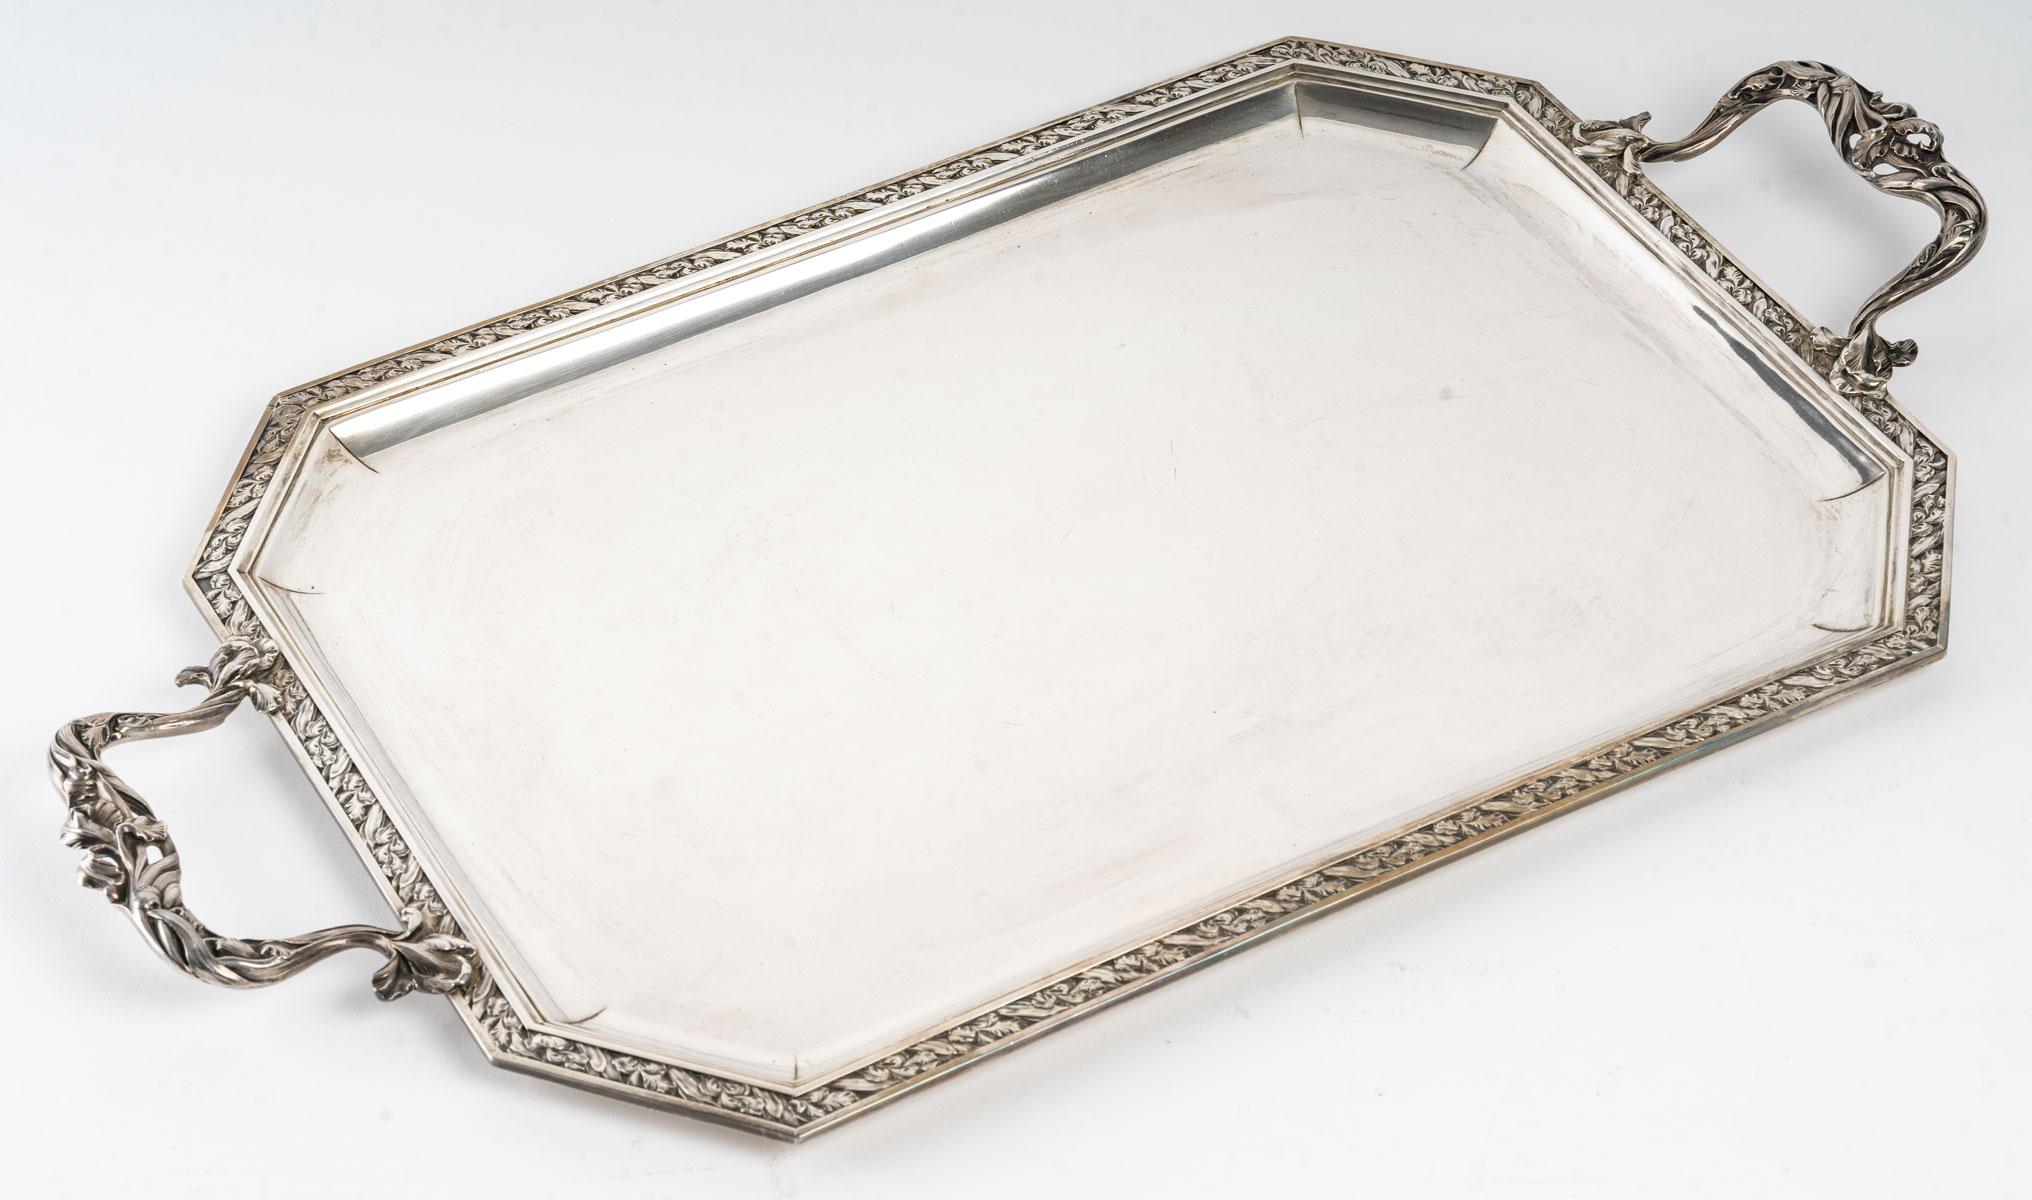 Solid silver tray
Hallmark-Minerva
Goldsmith hallmark: Puiforcat
Art Nouveau era
Around: 1905
Weight: 2,590 kg
Dimension at handles: 65 cm
Dimension Without: 58 cm
Width: 38 cm


Tray decorated with an iris frieze that surrounds the plain tray, as